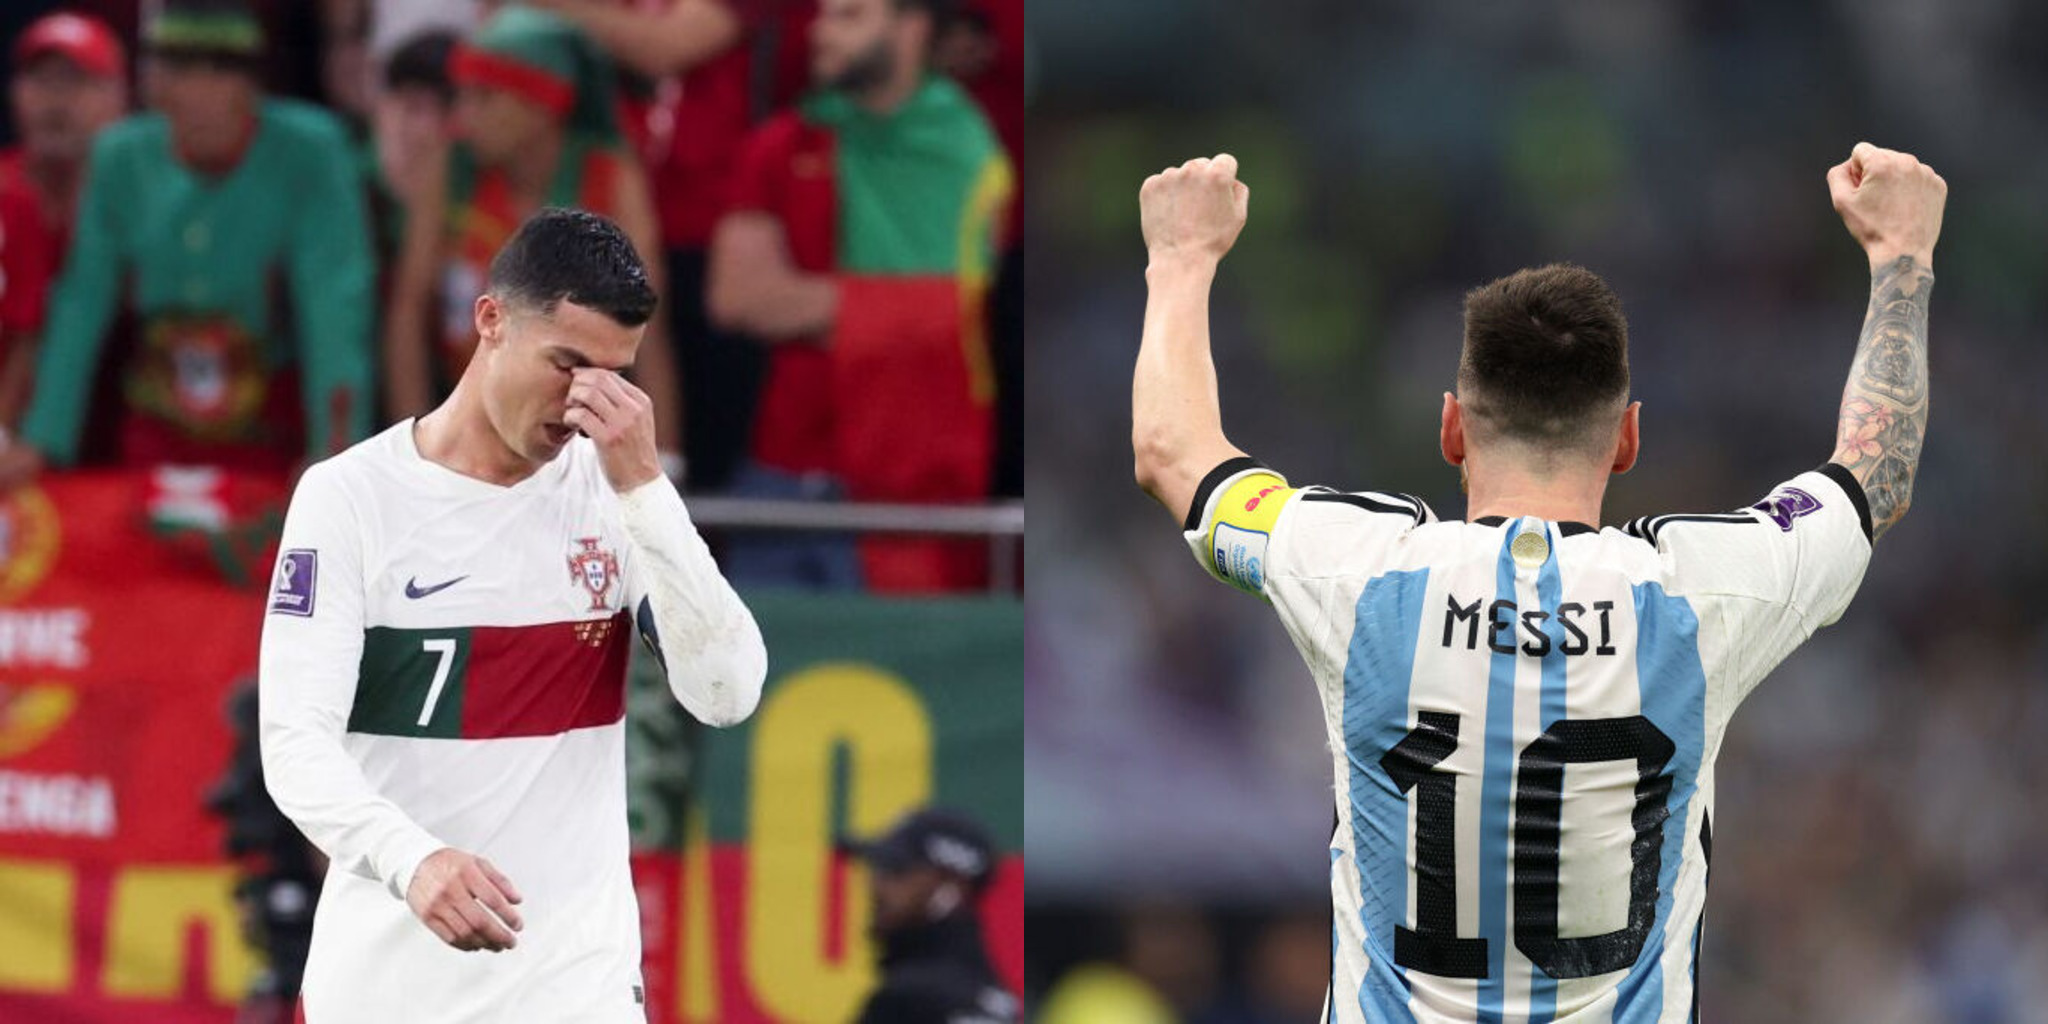 Ronaldo reacts after Portugal's quarterfinal loss to Morocco during the World Cup in Qatar on Dec. 10, 2022. Left: Messi celebrates after scoring Argentina's first goal in the semifinal against Croatia on Dec. 13, 2022. (Getty Images (Cao Can—Xinhua and Richard Heathcote))